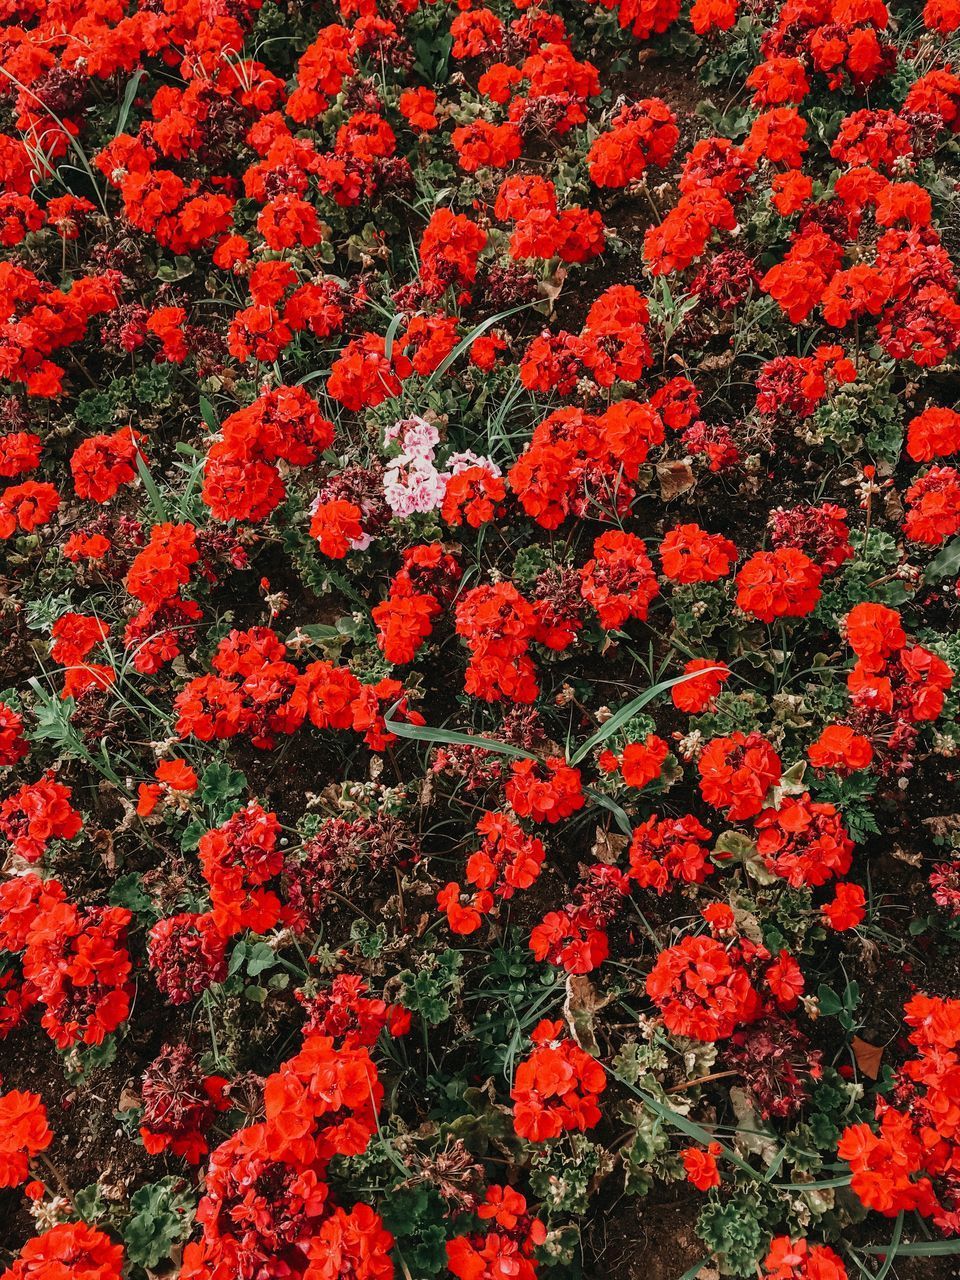 HIGH ANGLE VIEW OF RED FLOWERING PLANTS